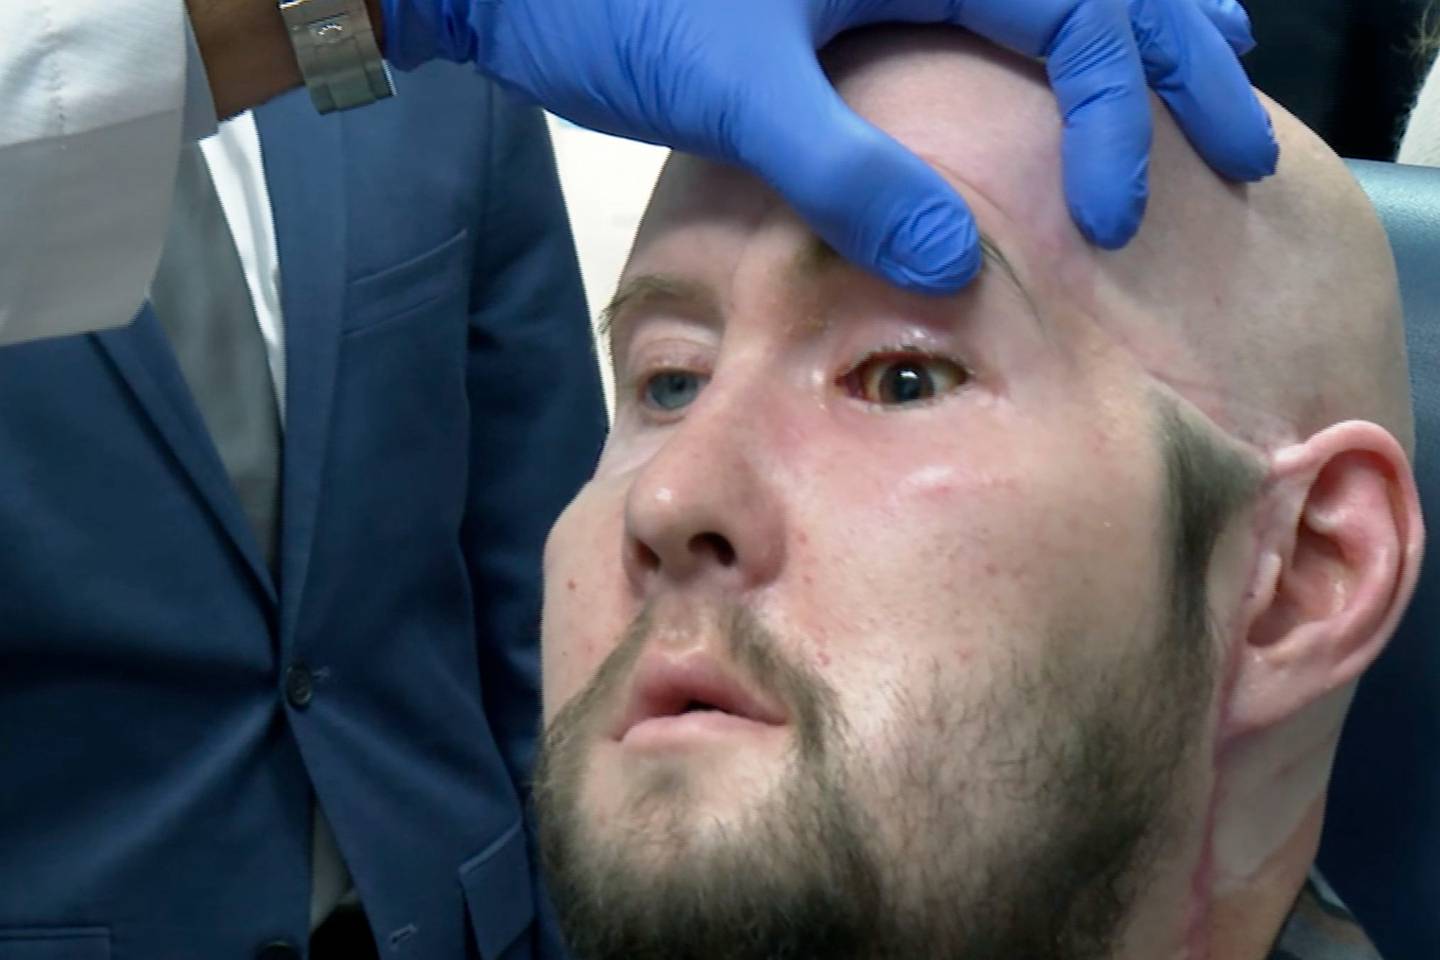 Man blinded by 7,000-volt electric shock receives world's first whole eye transplant